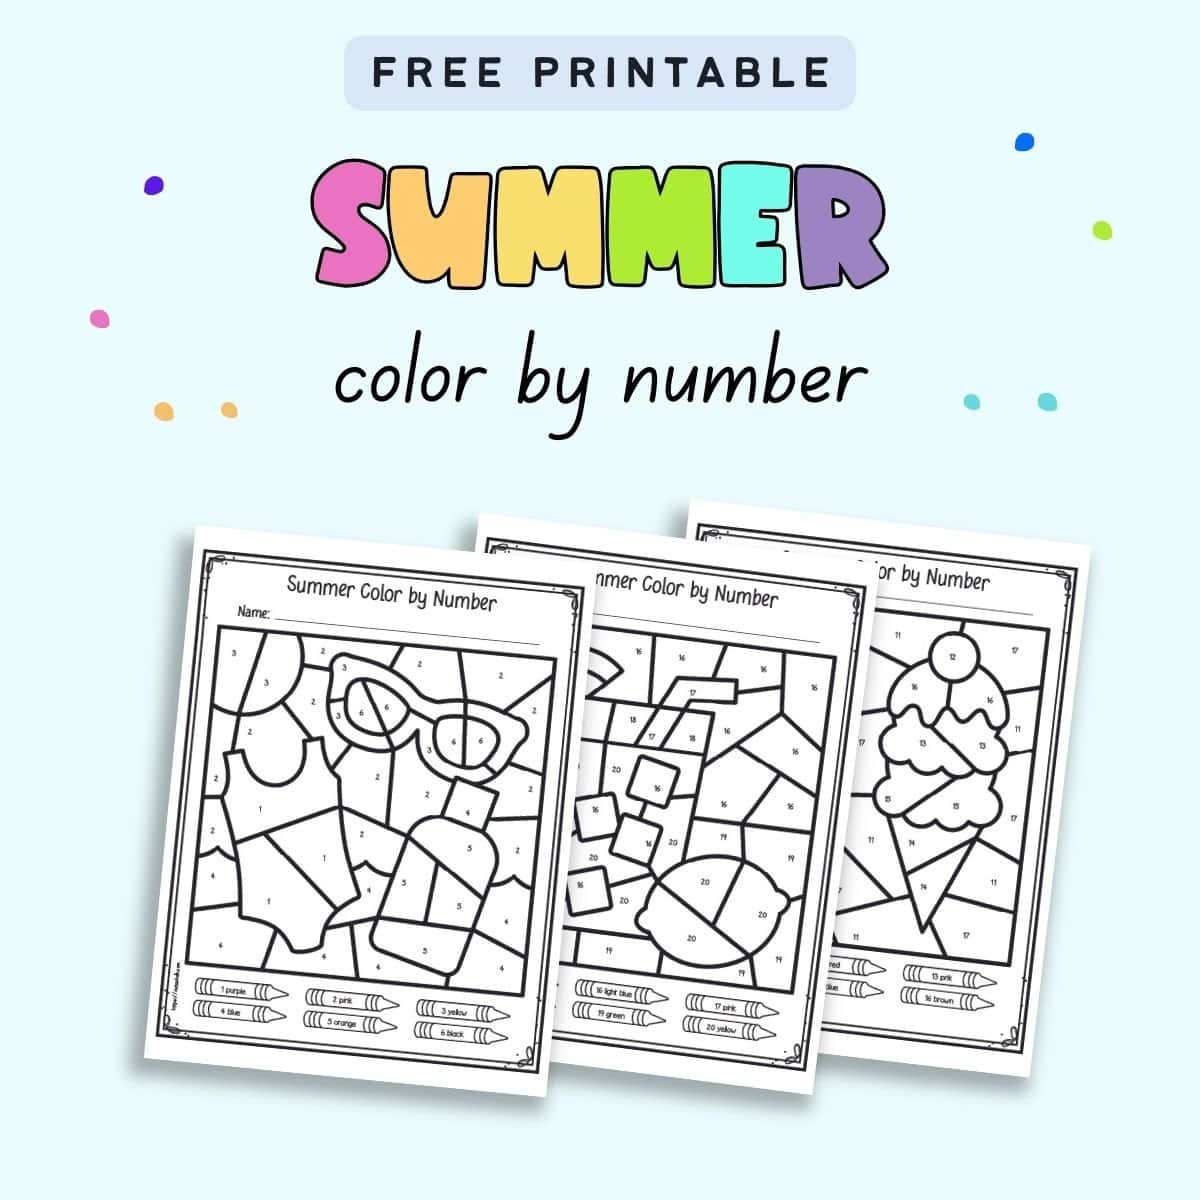 Text "free printable summer color by number" with a preview of three color by number pages.